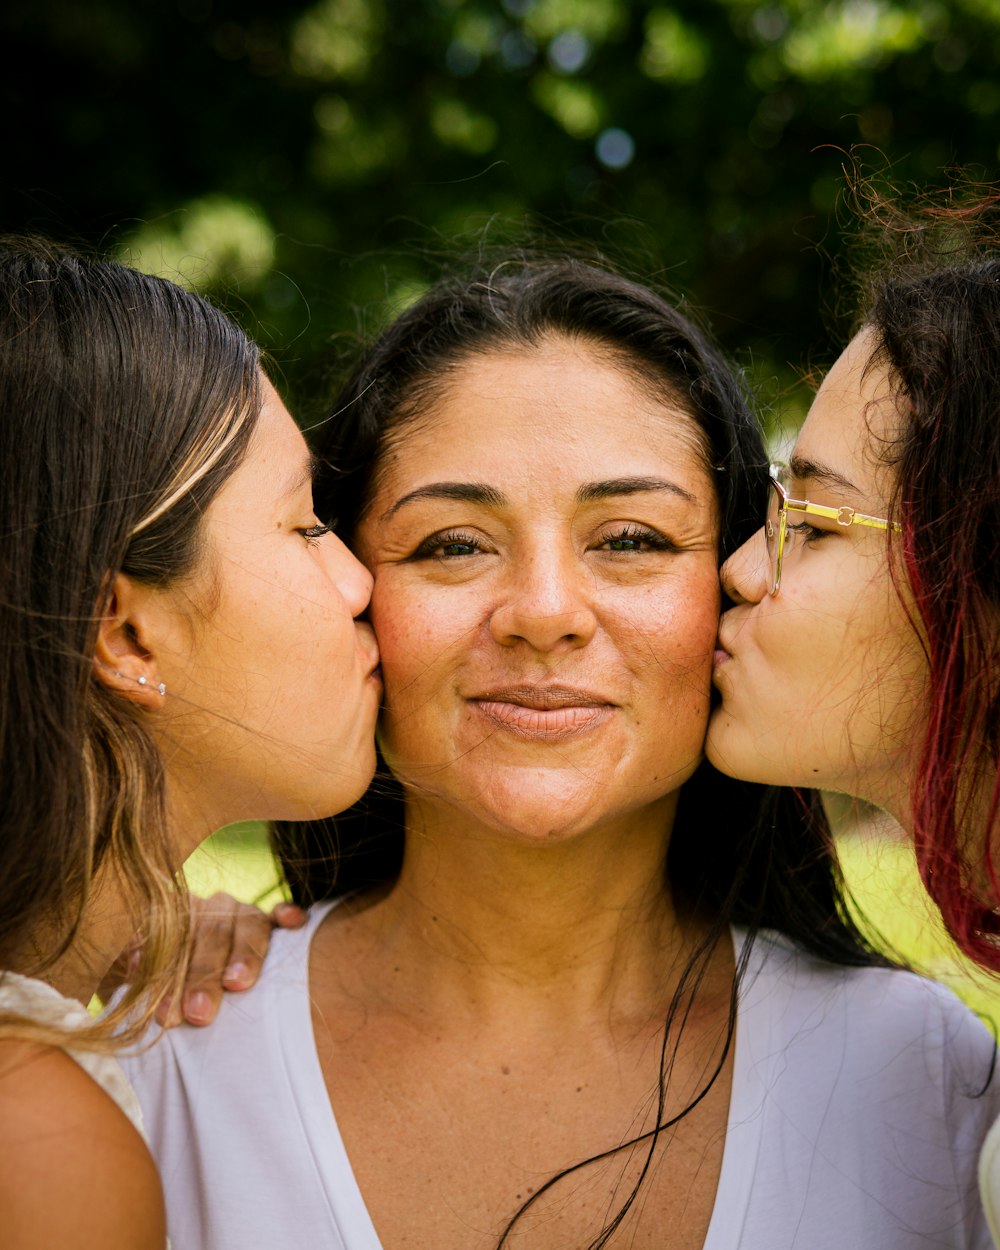 three women kissing each other with their noses close together